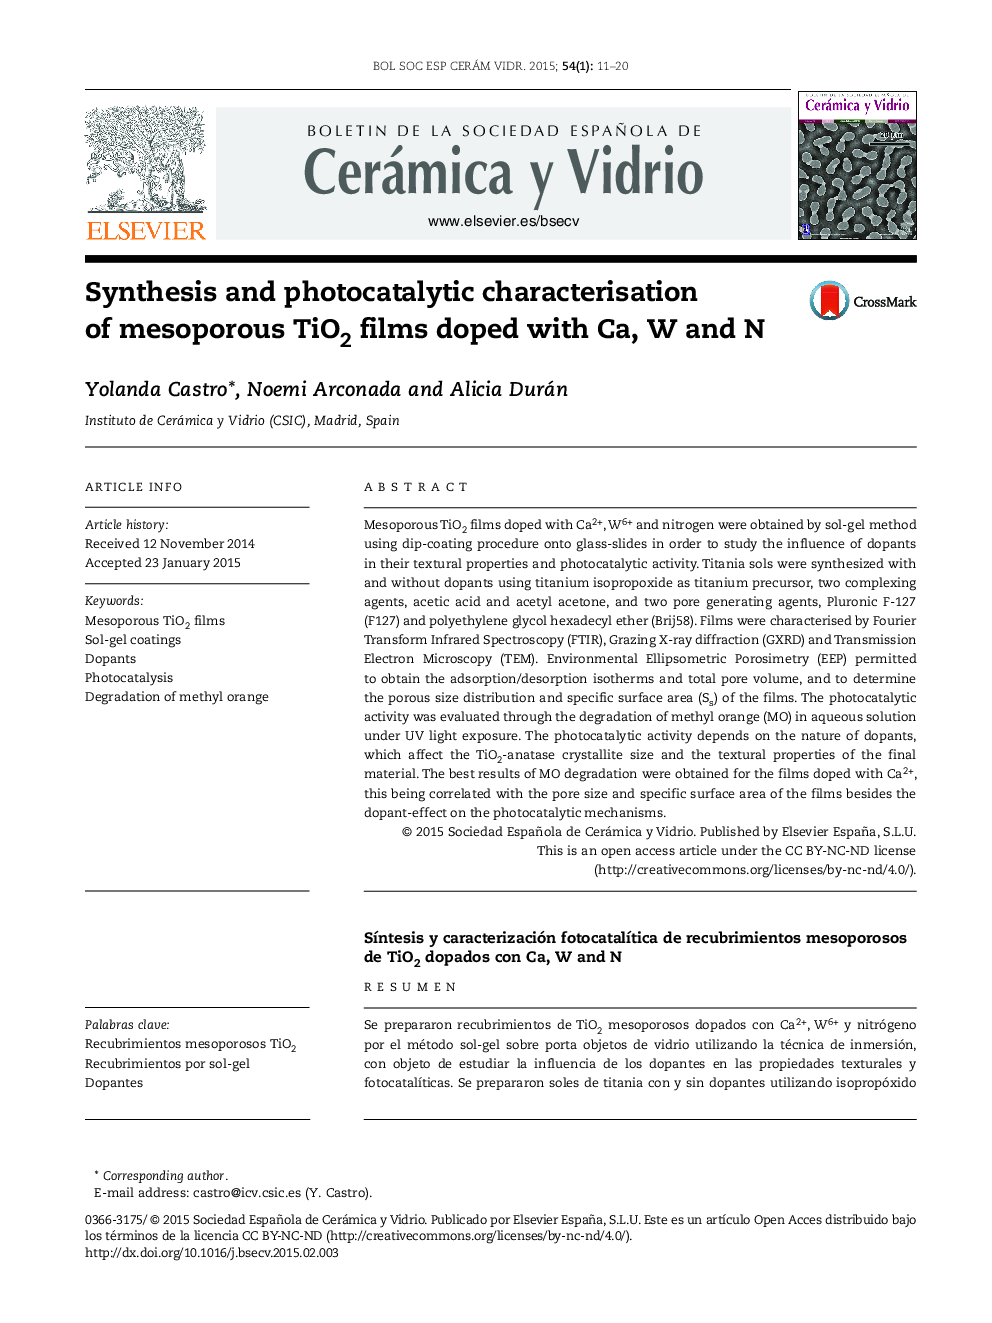 Synthesis and photocatalytic characterisation of mesoporous TiO2 films doped with Ca, W and N